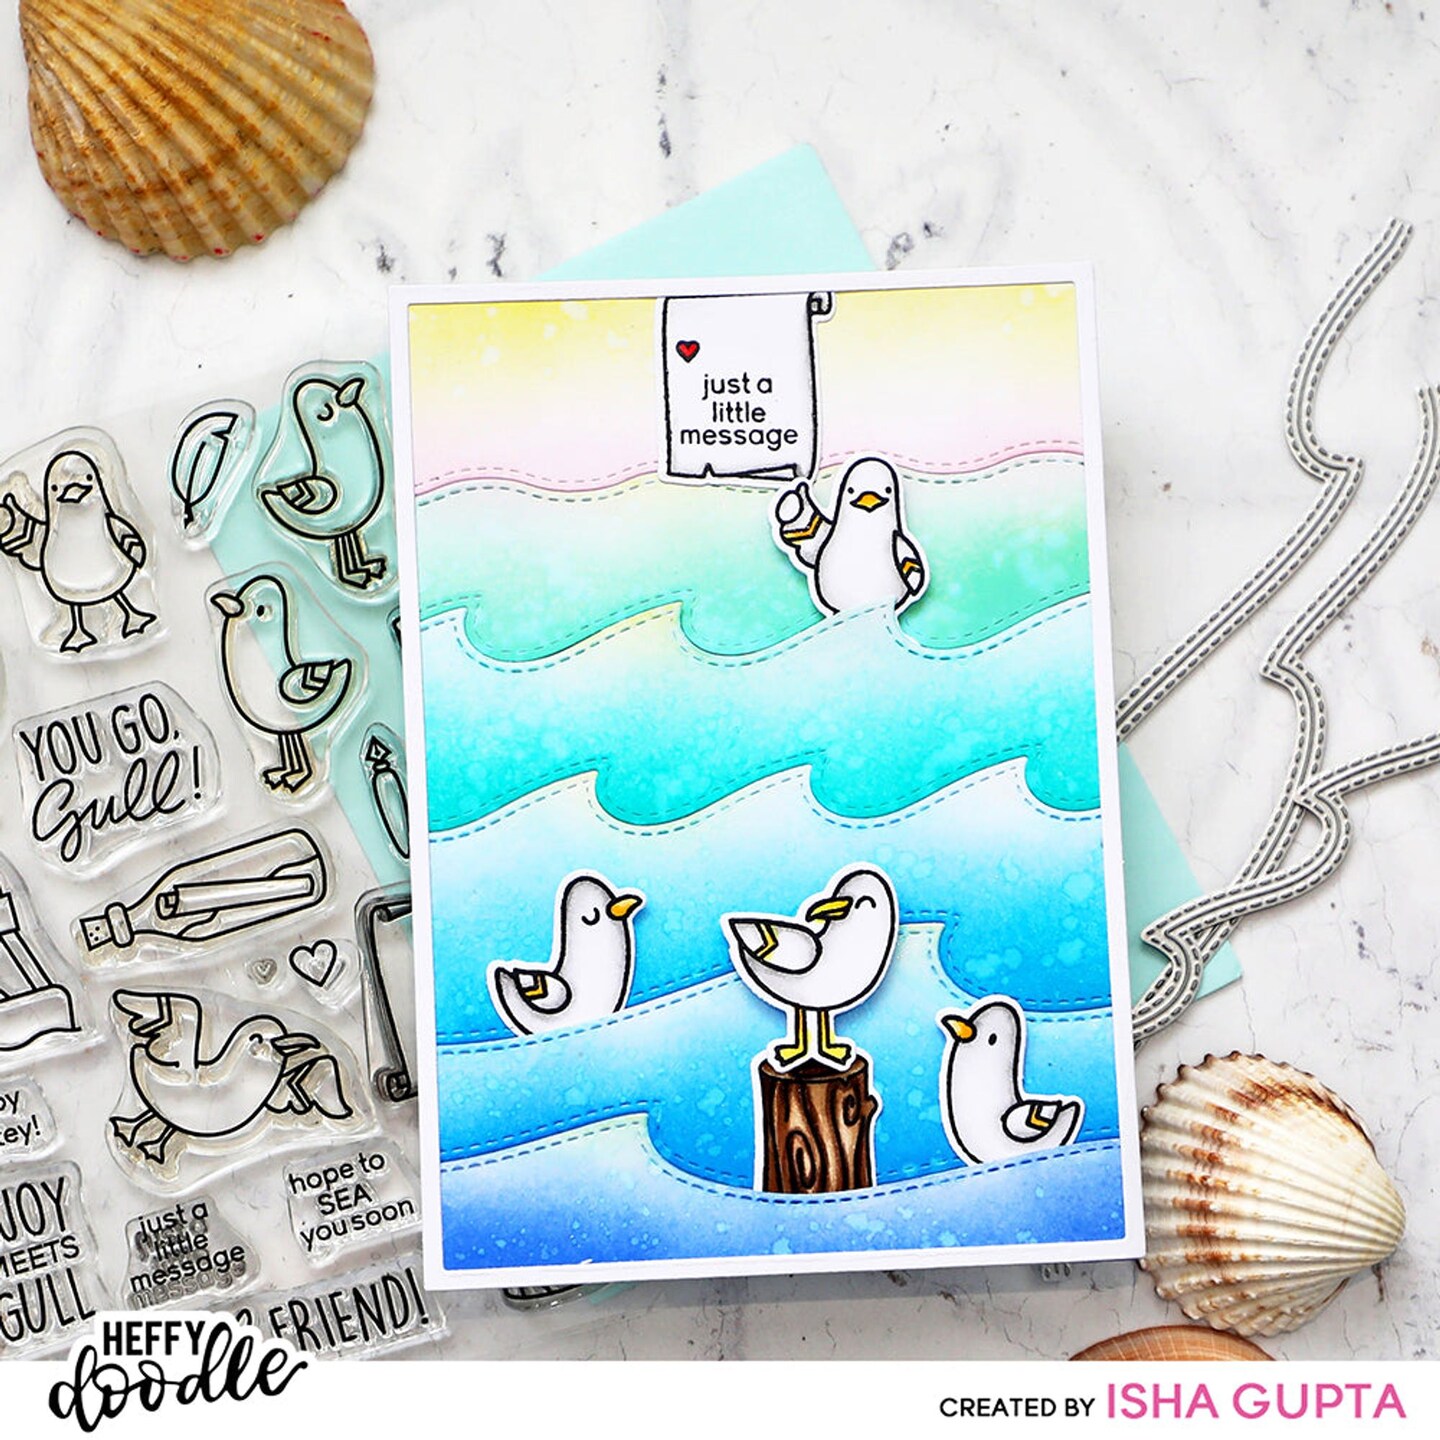 Happy Birthday Clear Stamps by Recollections™